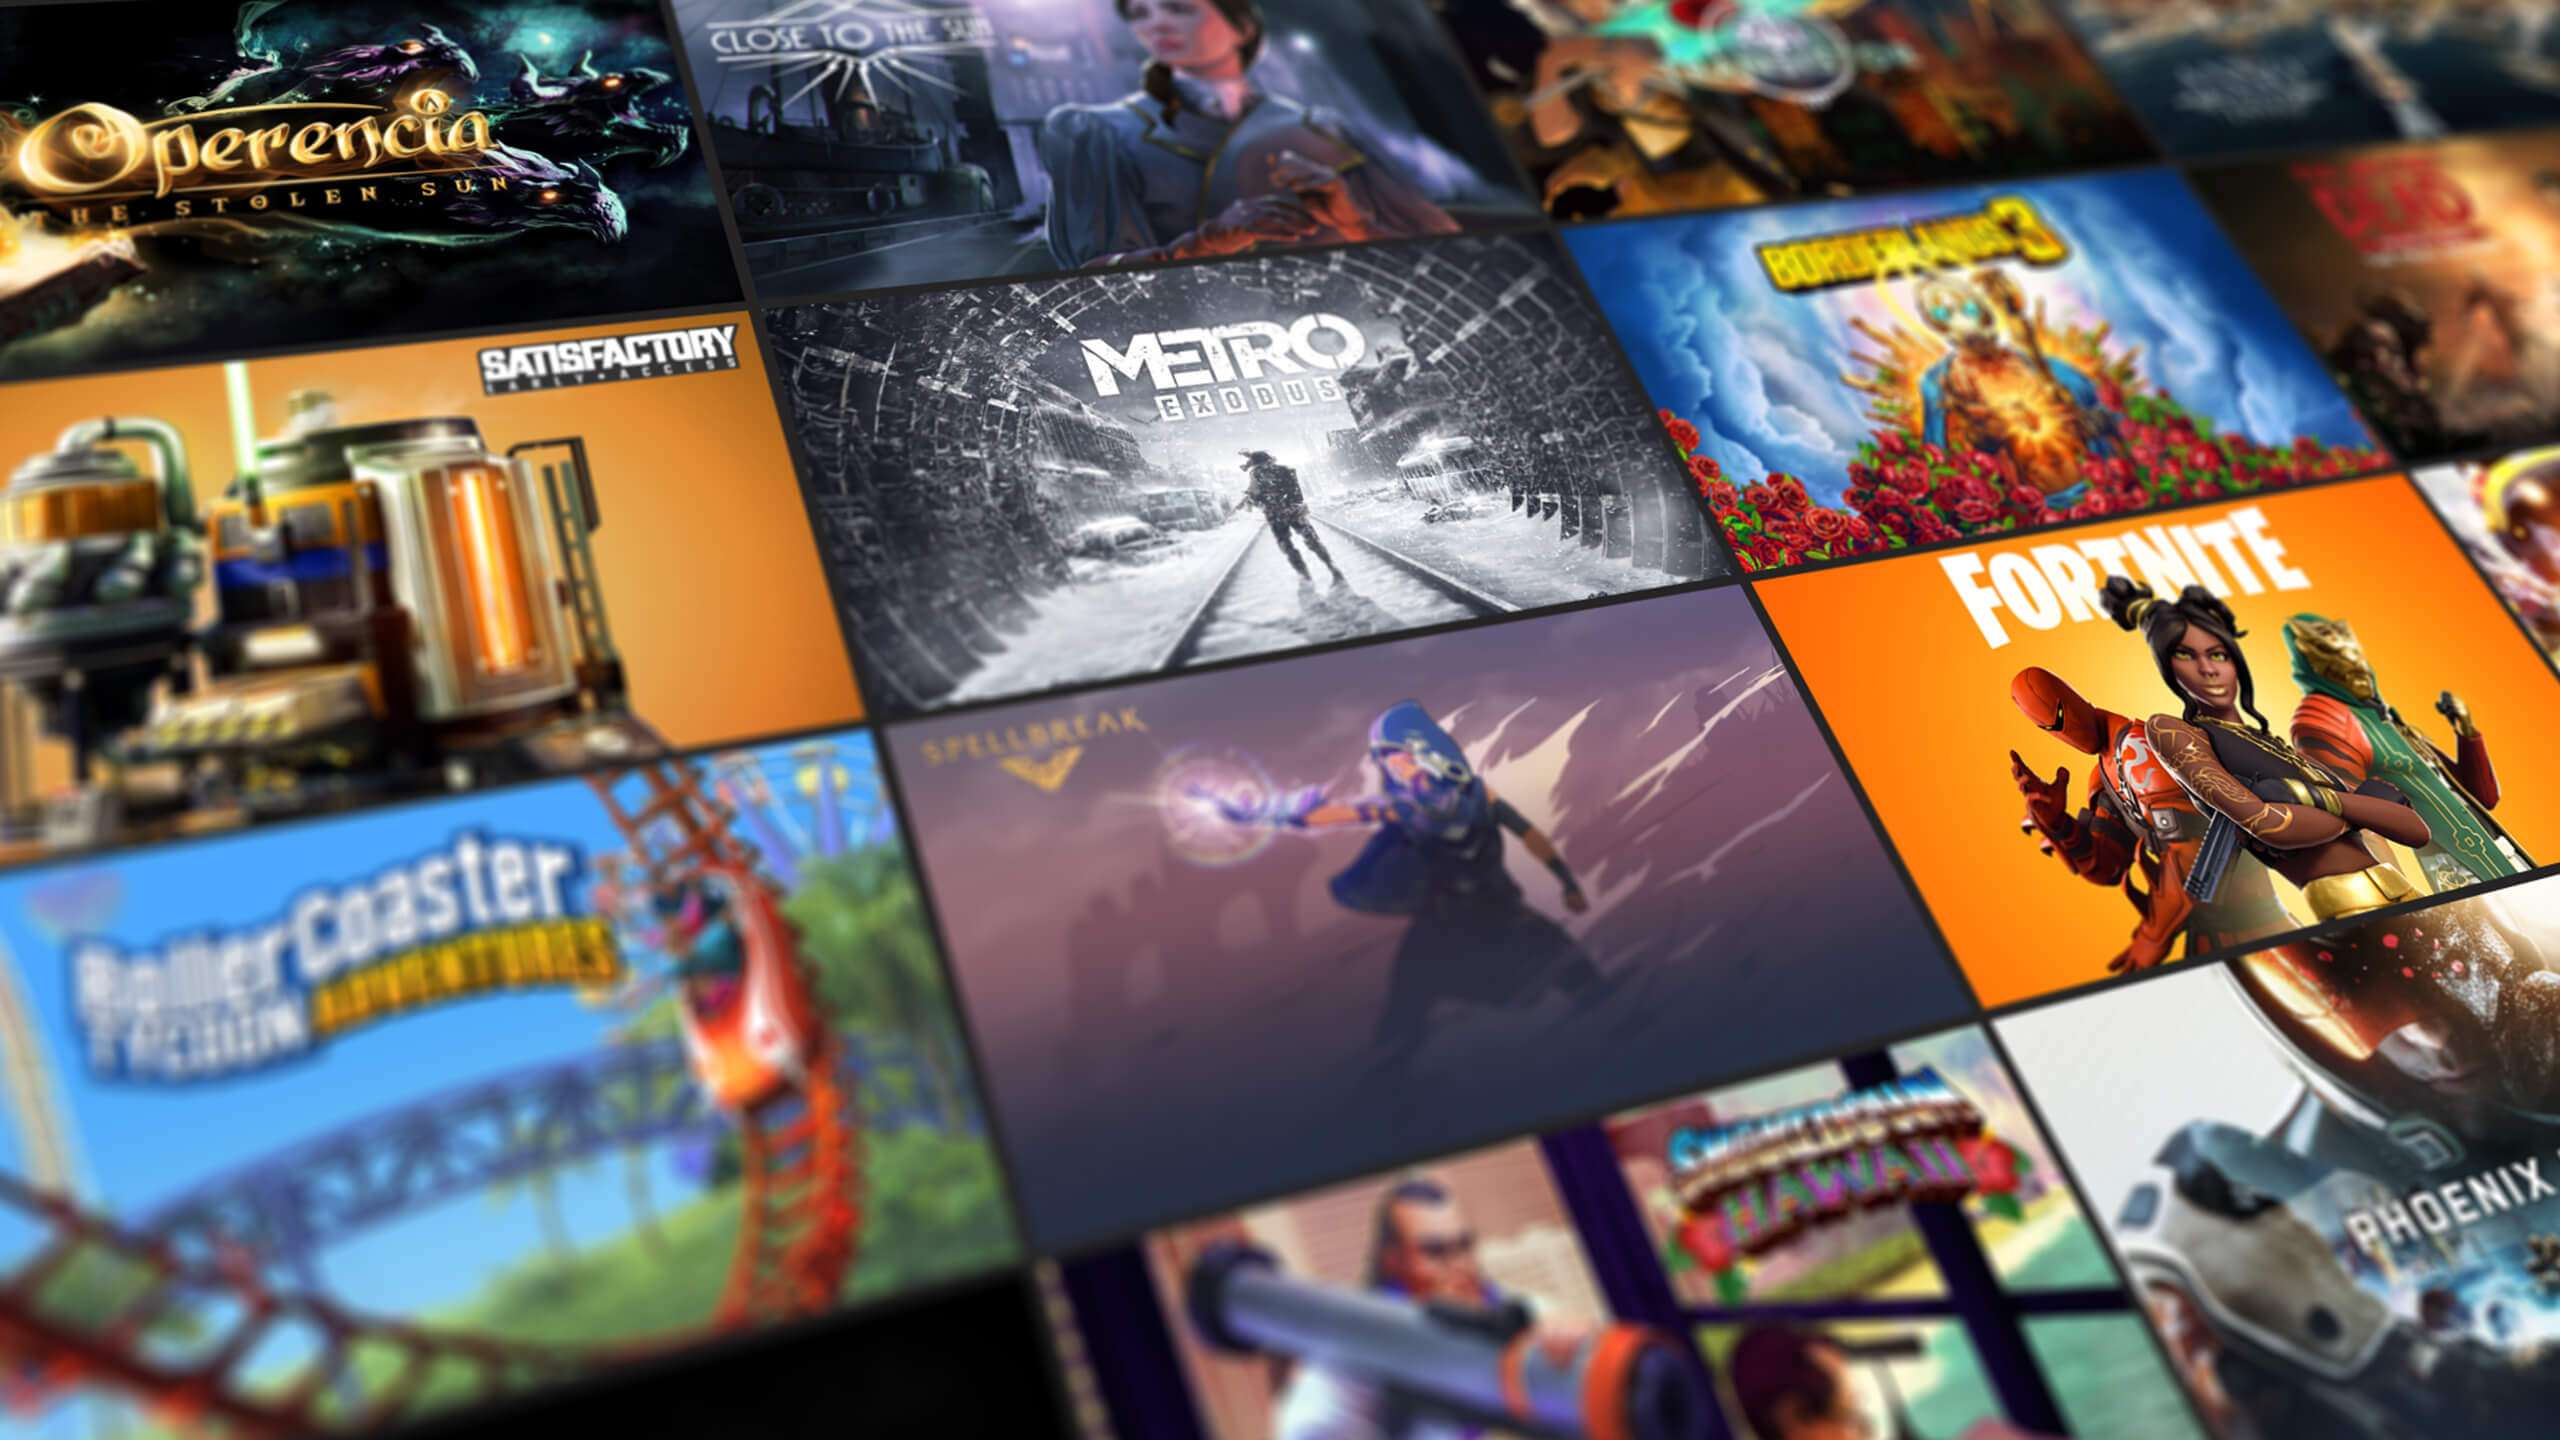 Looking for free PC games? Check out Epic Games' weekly offers